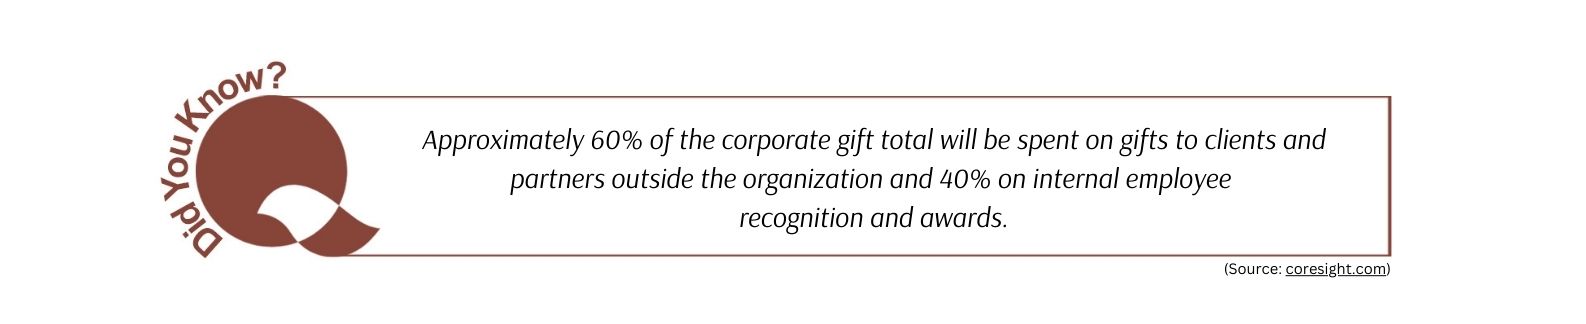 Approximately 60% of the corporate gift total will be spent on gifts to clients and partners outside the organization and 40% on internal employee recognition and awards.